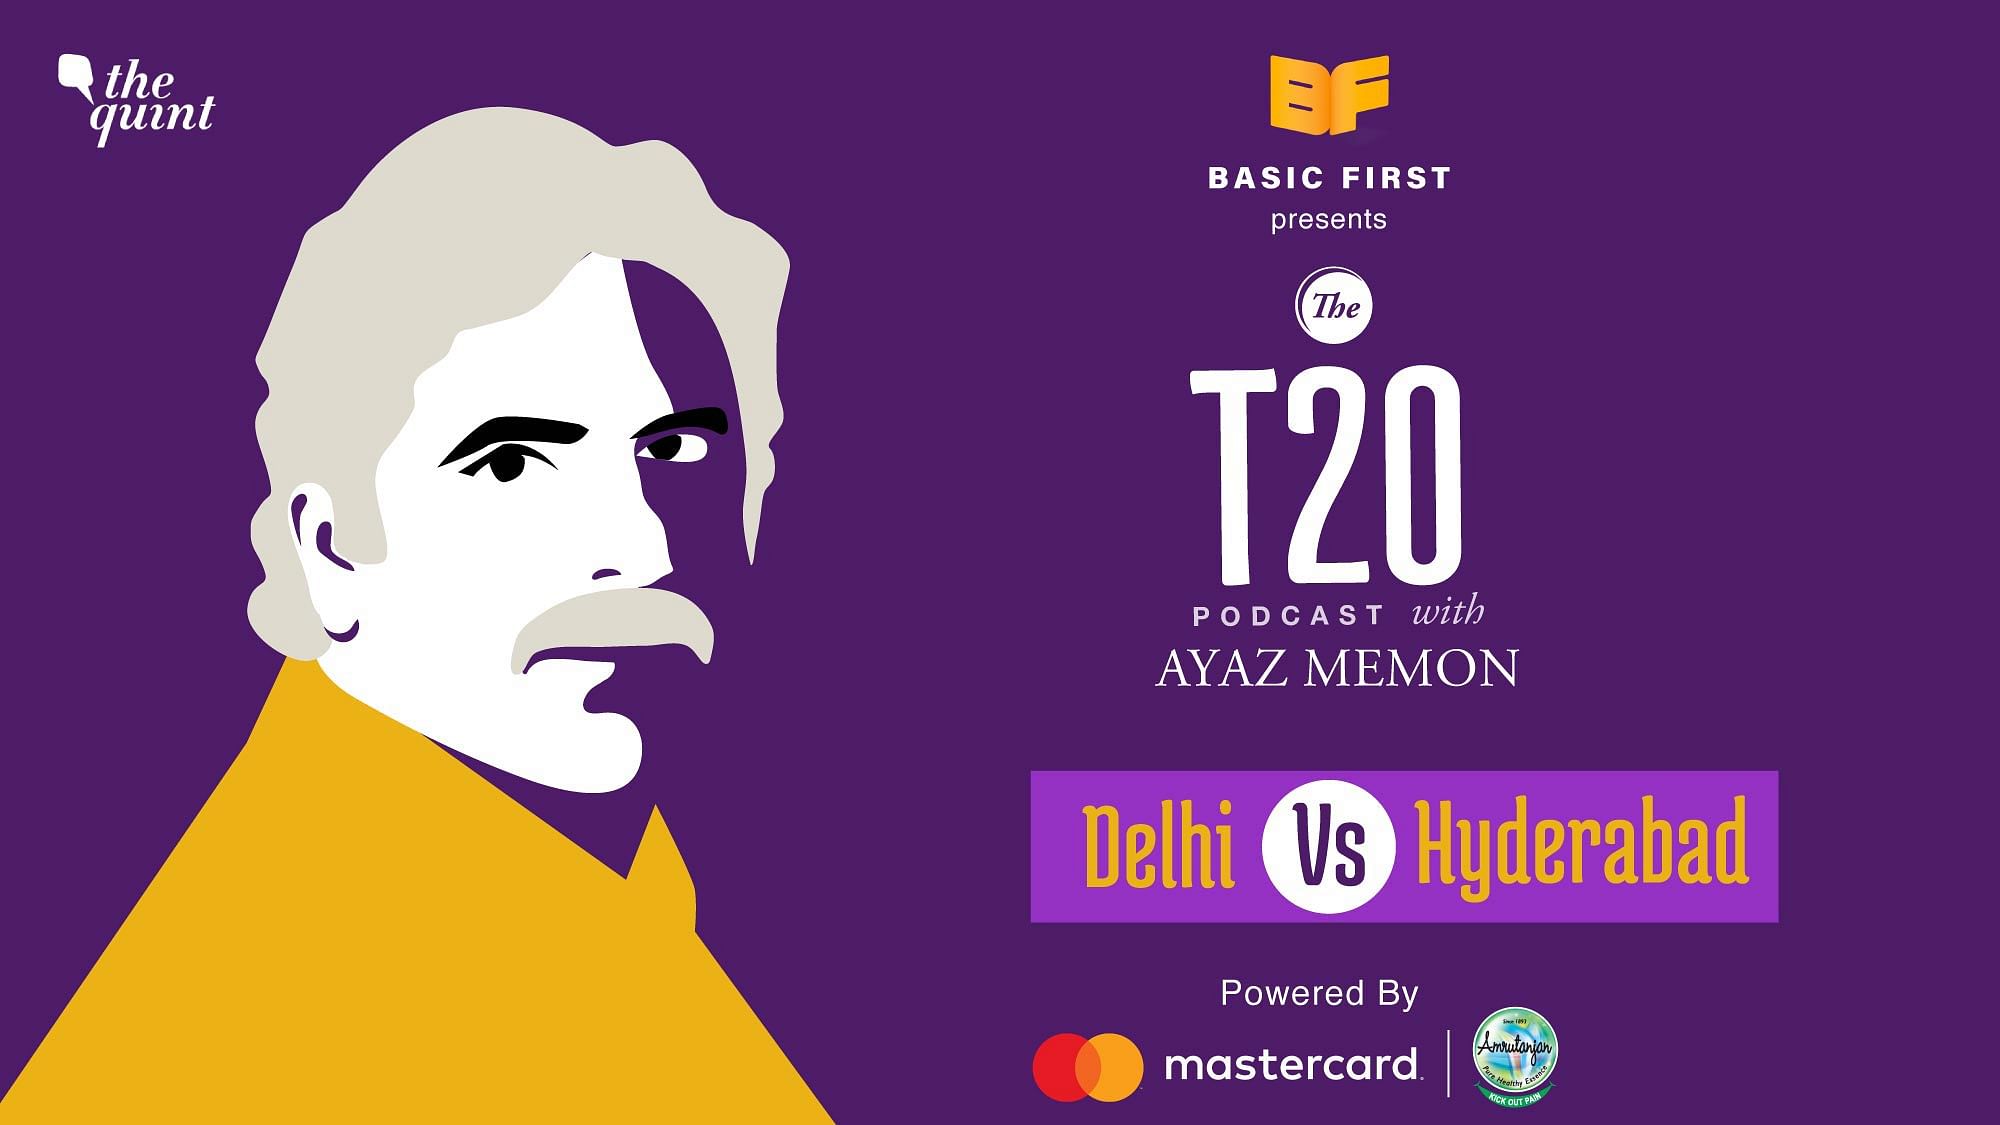 On episode 13 of The T20 Podcast, Ayaz Memon talks about Mumbai’s comeback after the Super Over defeat to Bangalore in their previous game.